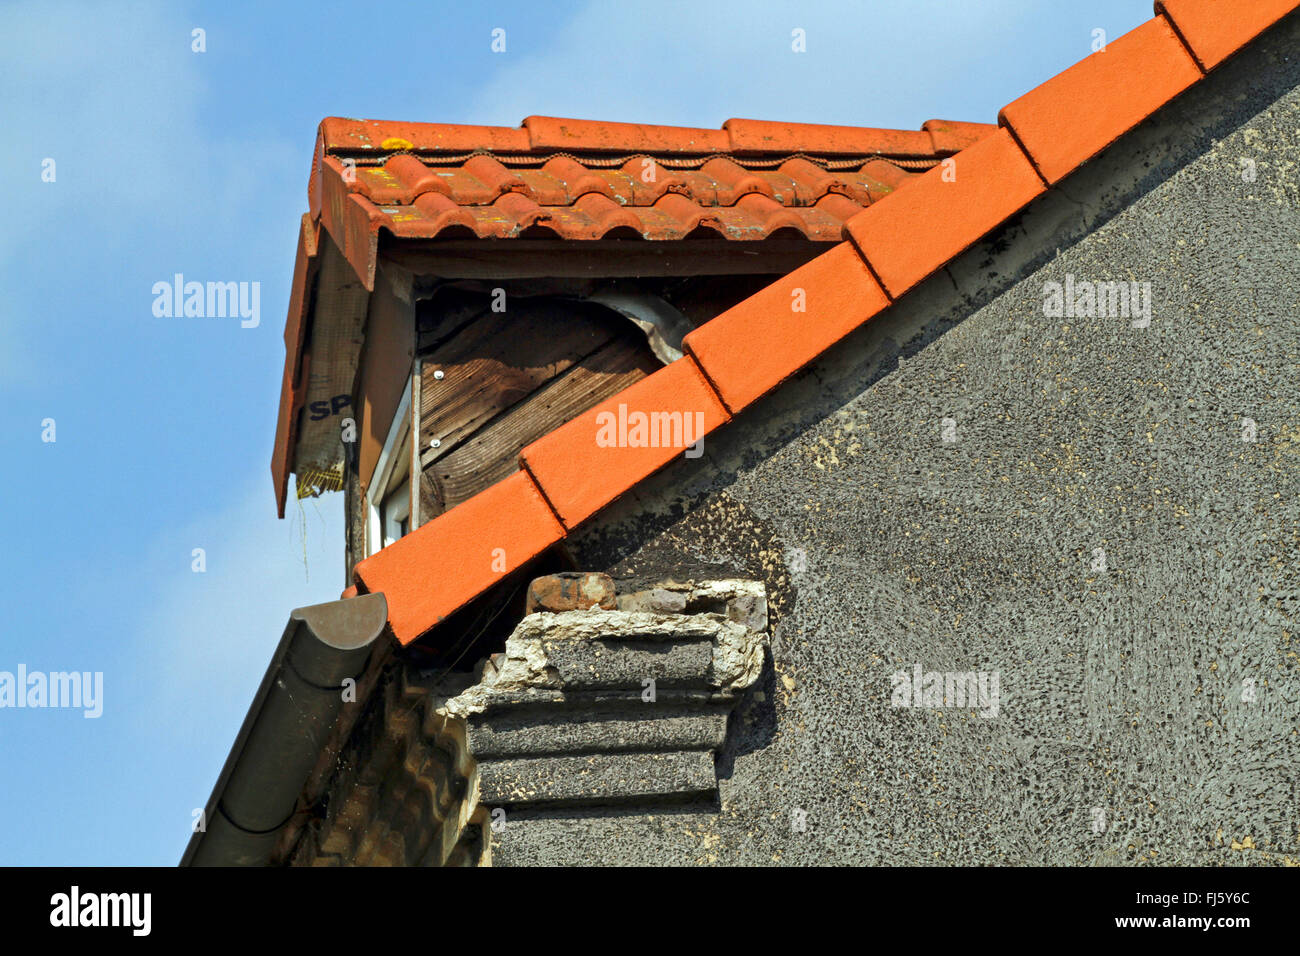 dormer with roof tiles, Germany Stock Photo